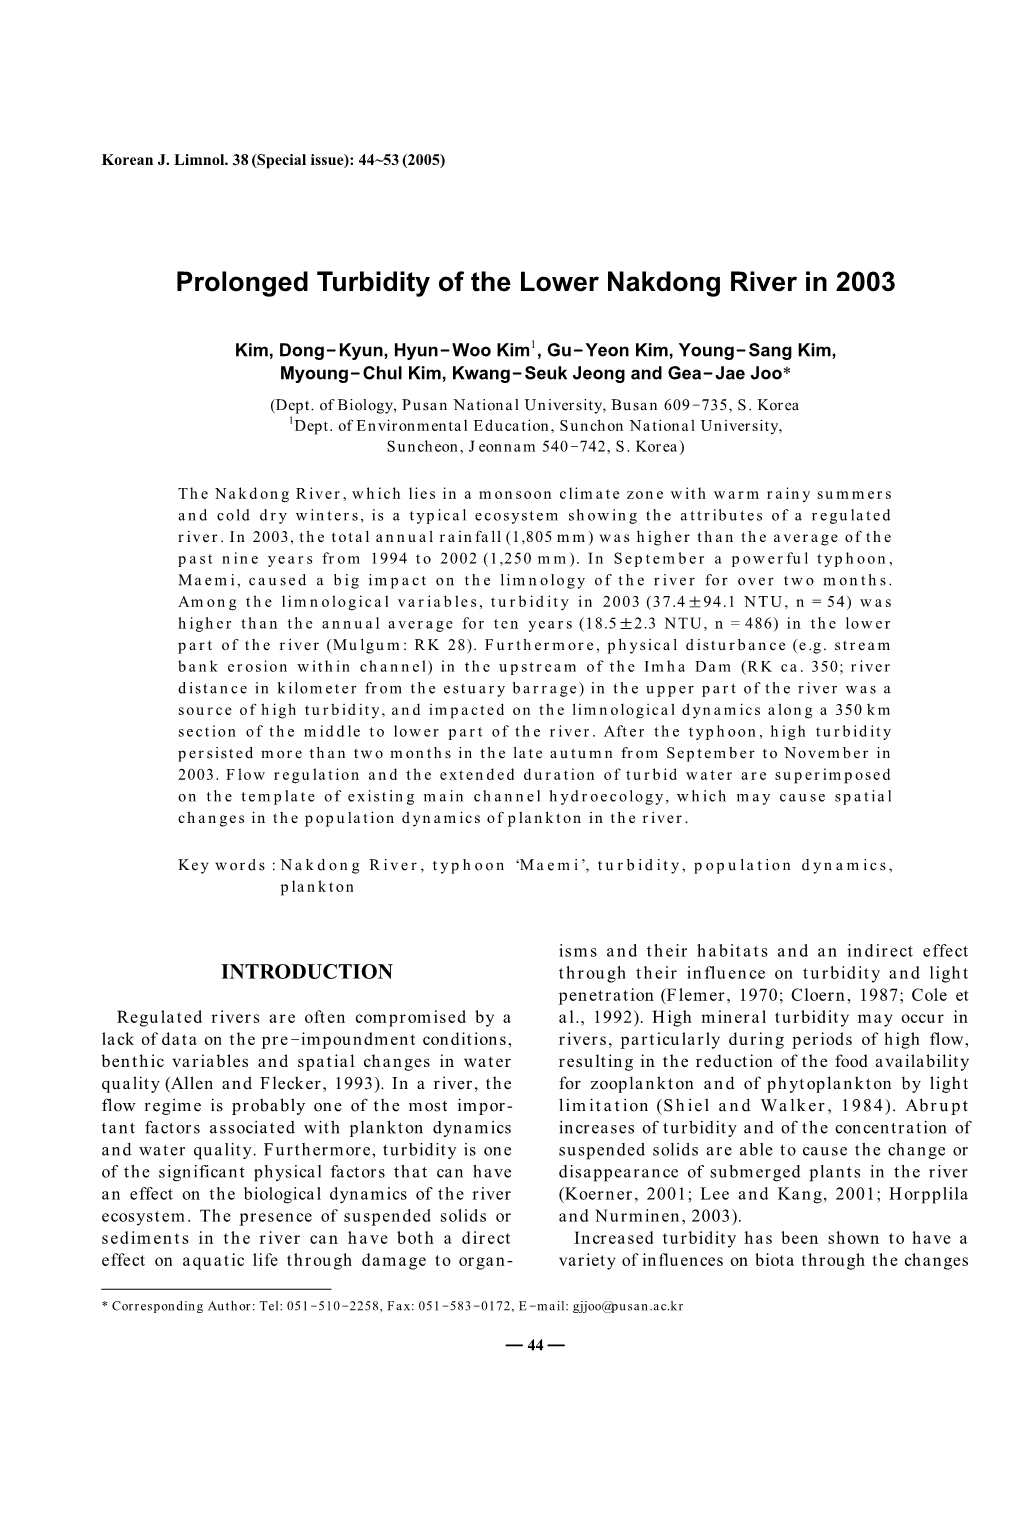 Prolonged Turbidity of the Lower Nakdong River in 2003